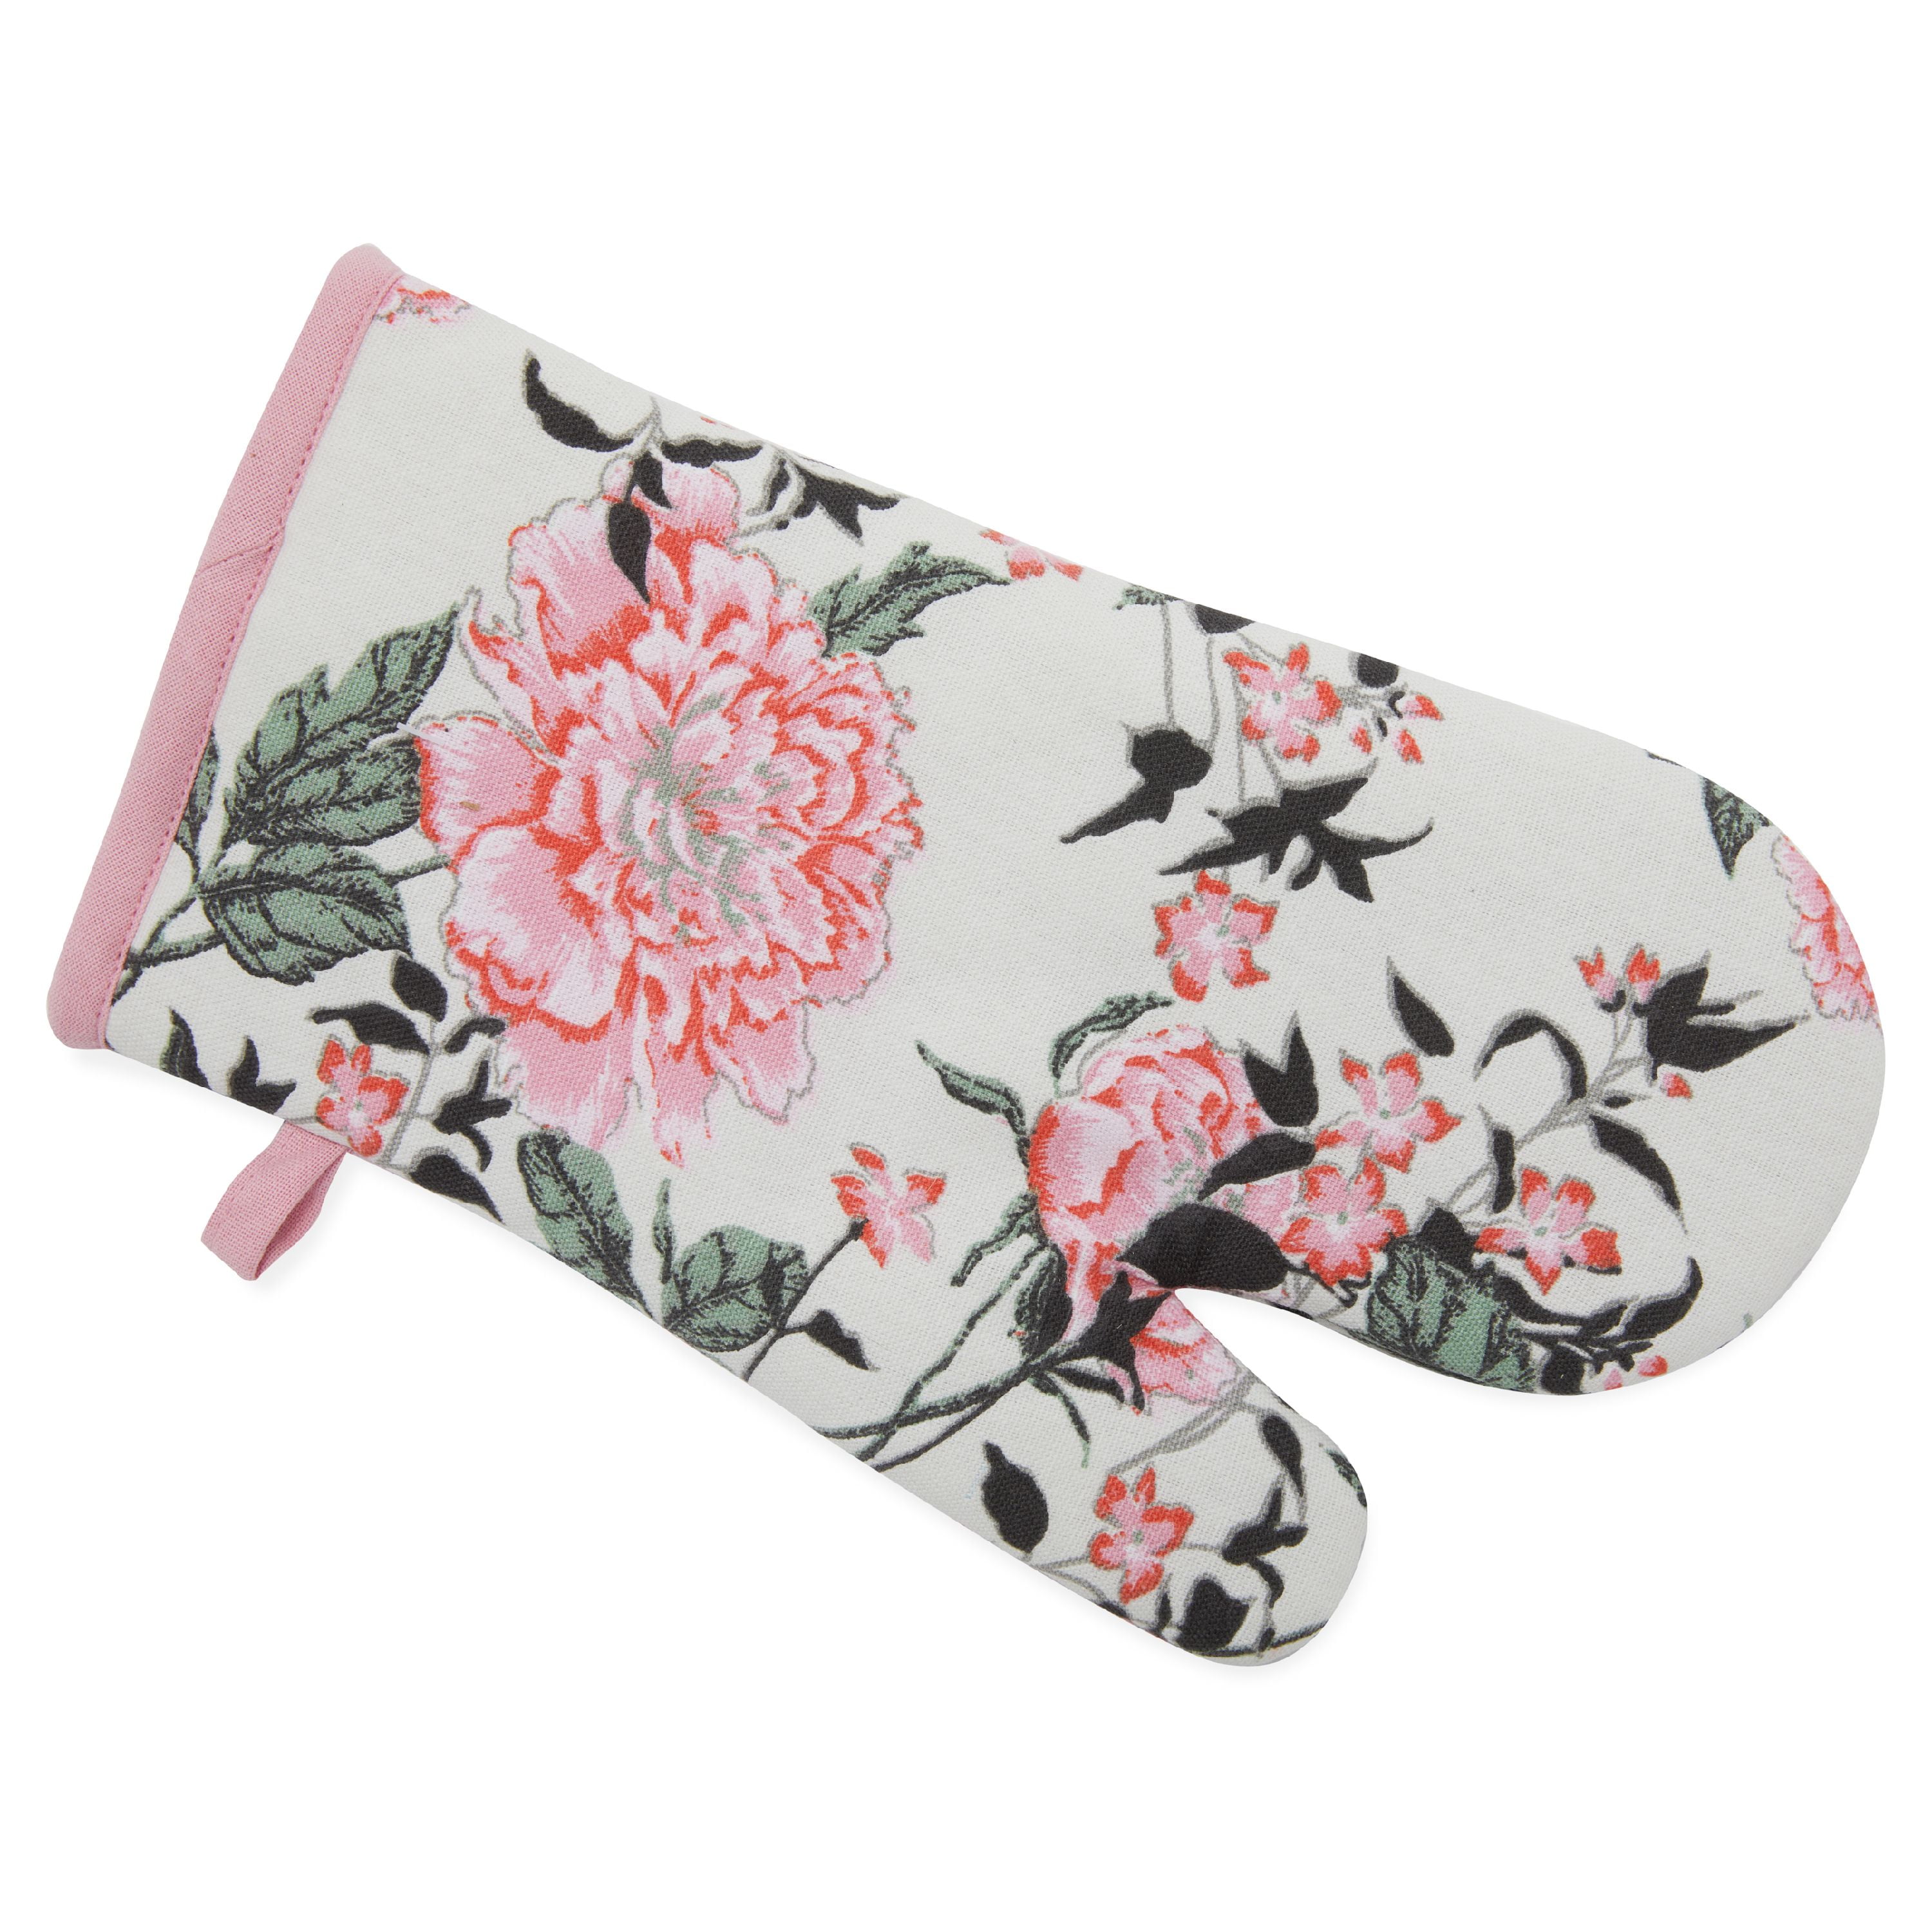 Personalized Floral Oven Mitts